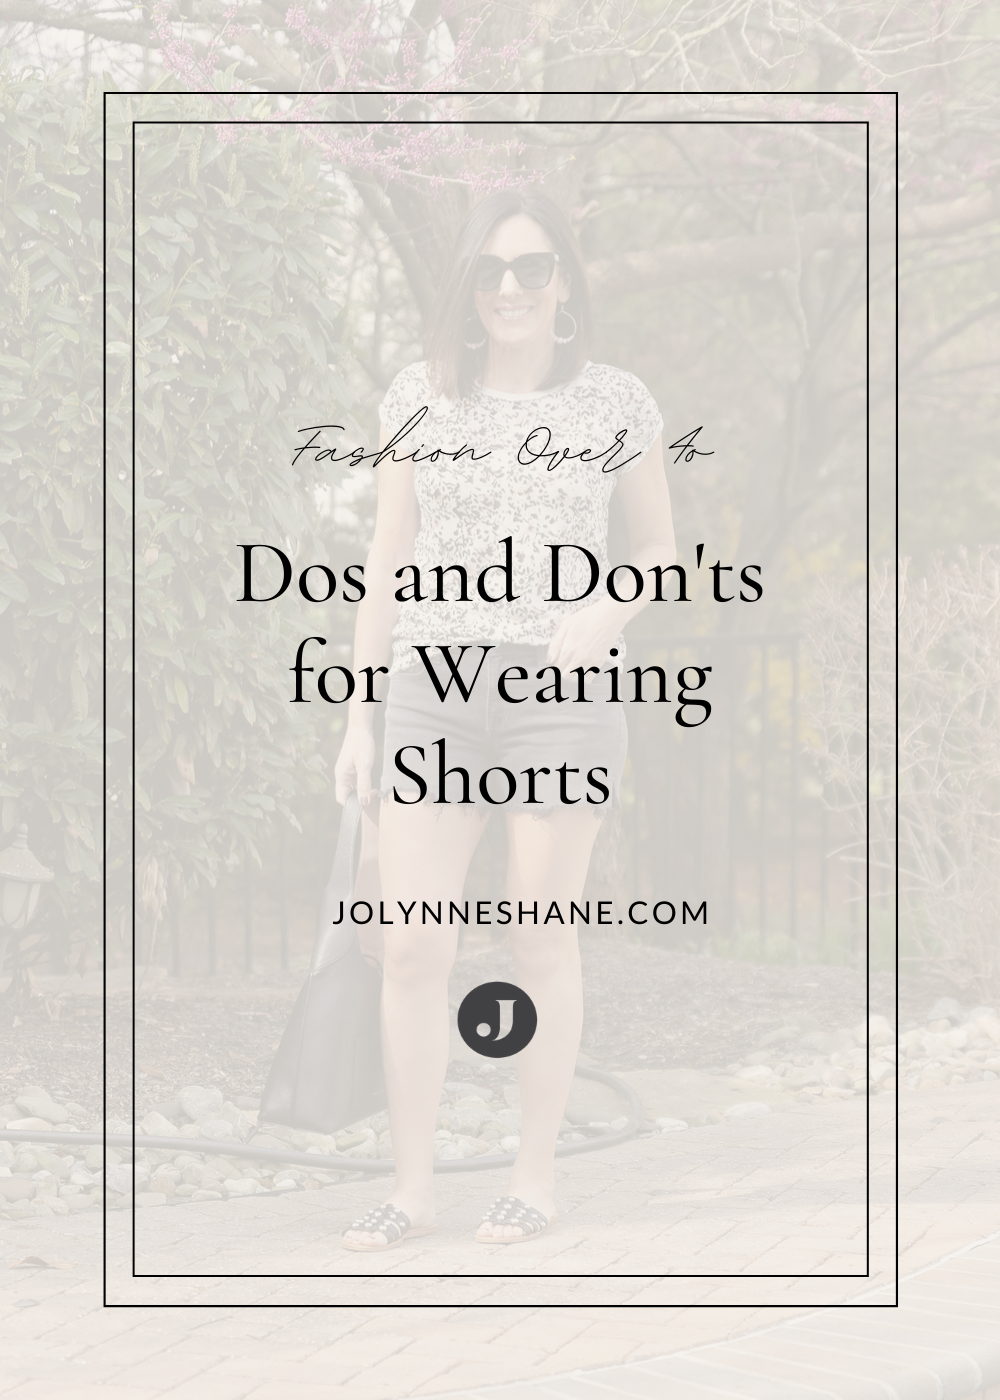 Shorts can go really wrong when they don’t fit well so, so here are my dos and don'ts for wearing shorts over 40 and looking your best.